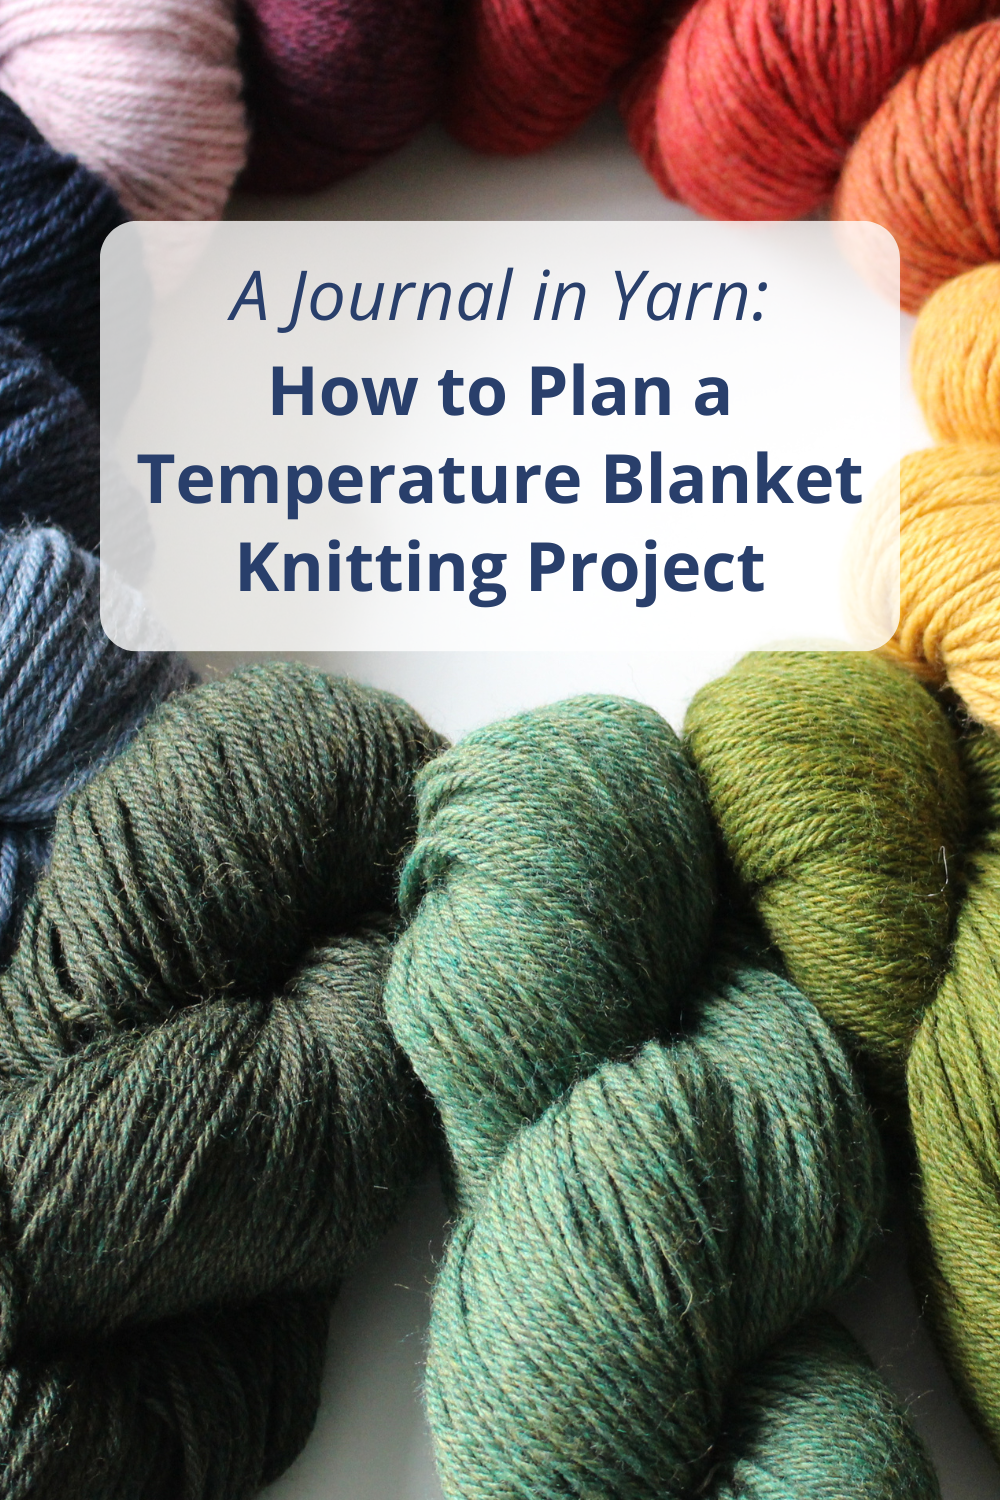 Knitting Journal: A Notebook for Up to 50 Knitting Projects - Keep Track of Yarns and Needles